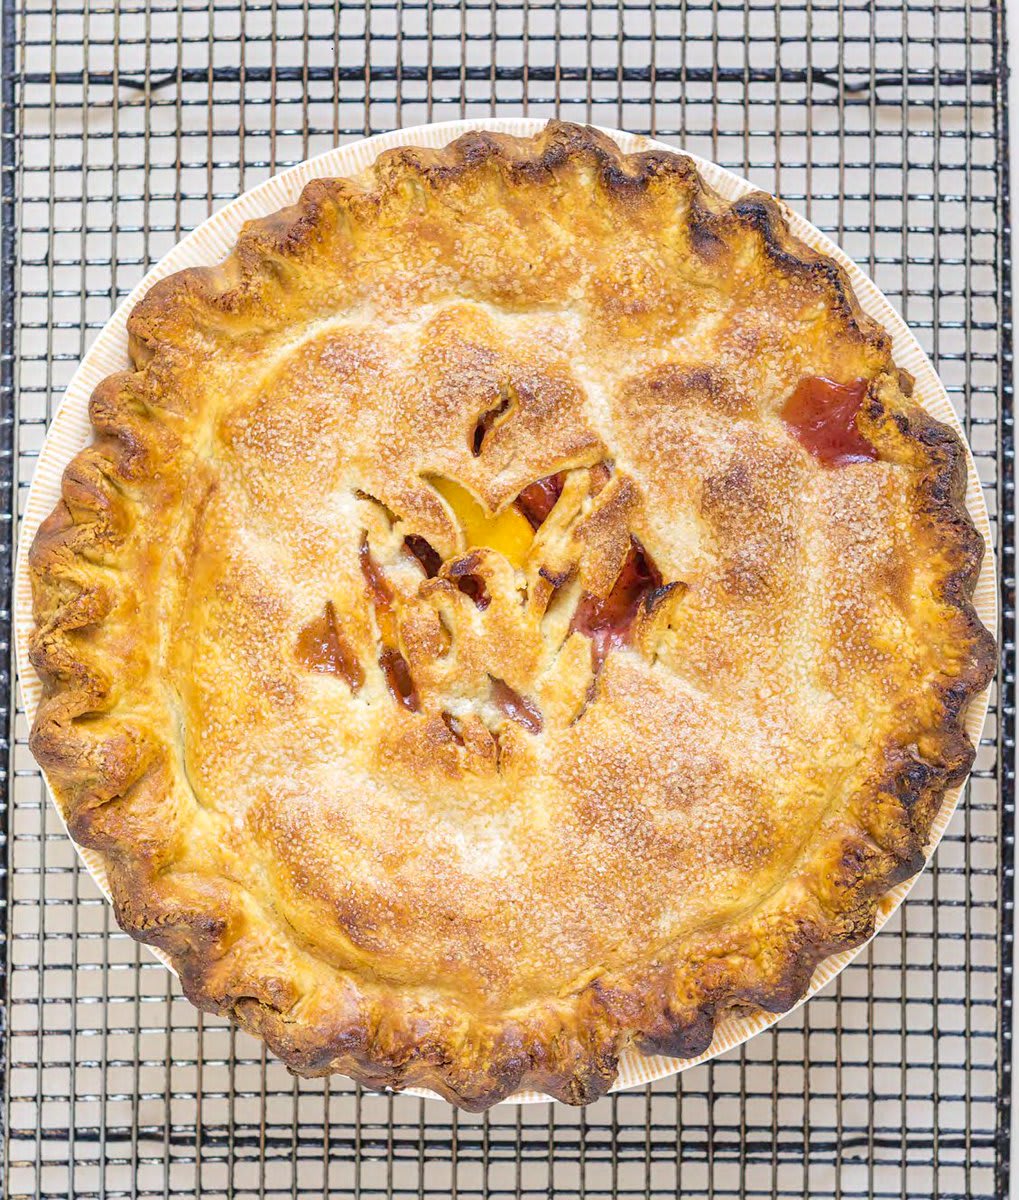 “I love the mace in the recipe. It makes me think of the perfect bite of a peach on my grandmother’s porch!” says @StarBrownie of Nicole Rucker's July Flame Peach Pie recipe: